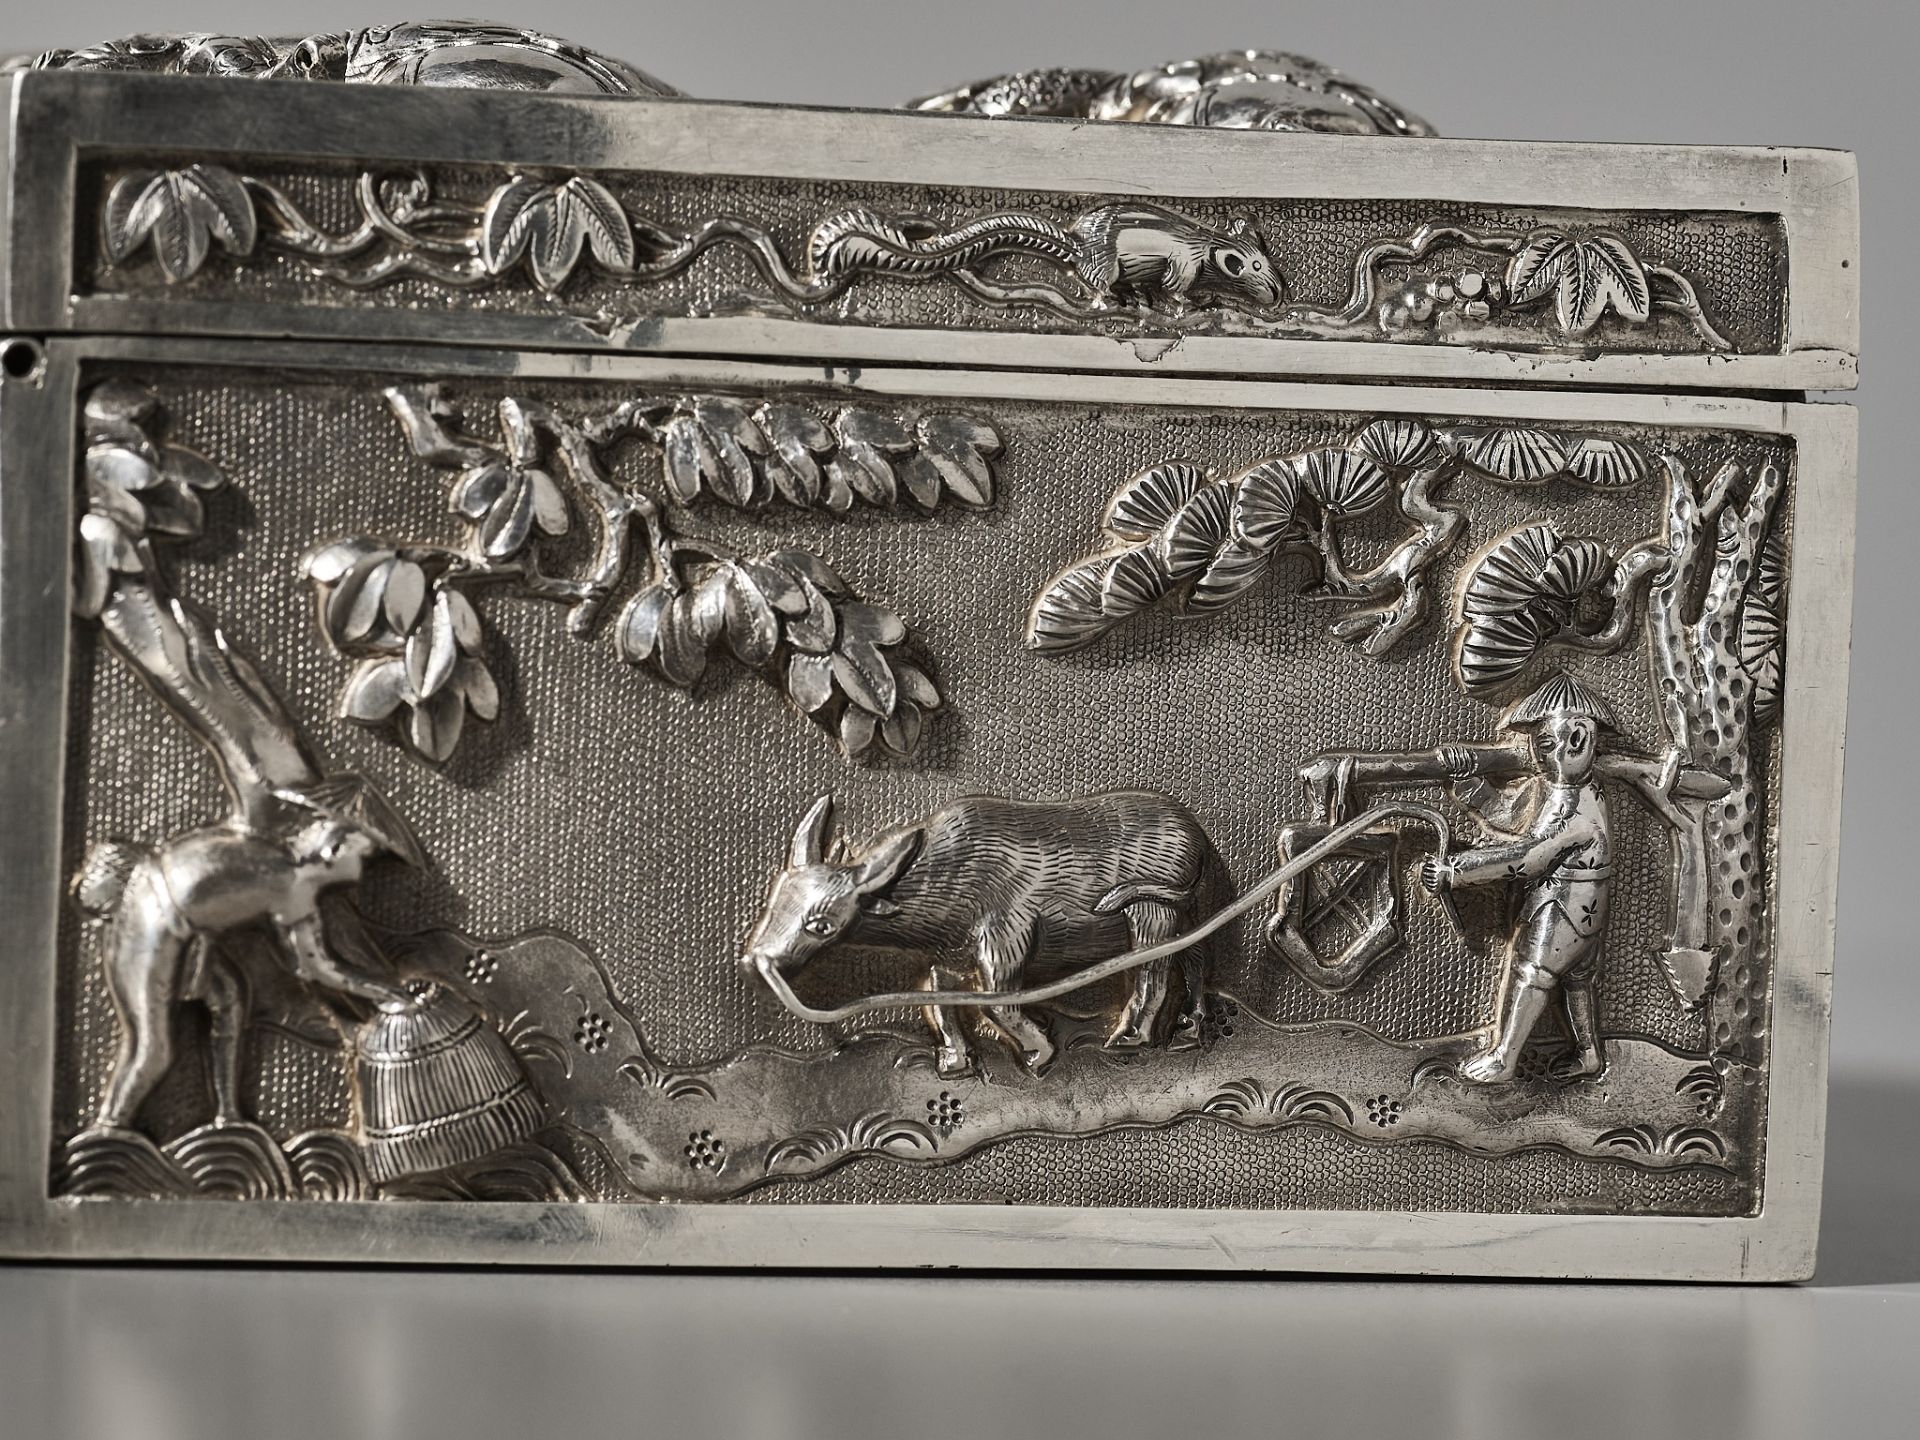 AN EXPORT SILVER REPOUSSE CIGAR BOX AND COVER, TONG YI MARK, LATE QING DYNASTY - Image 19 of 22